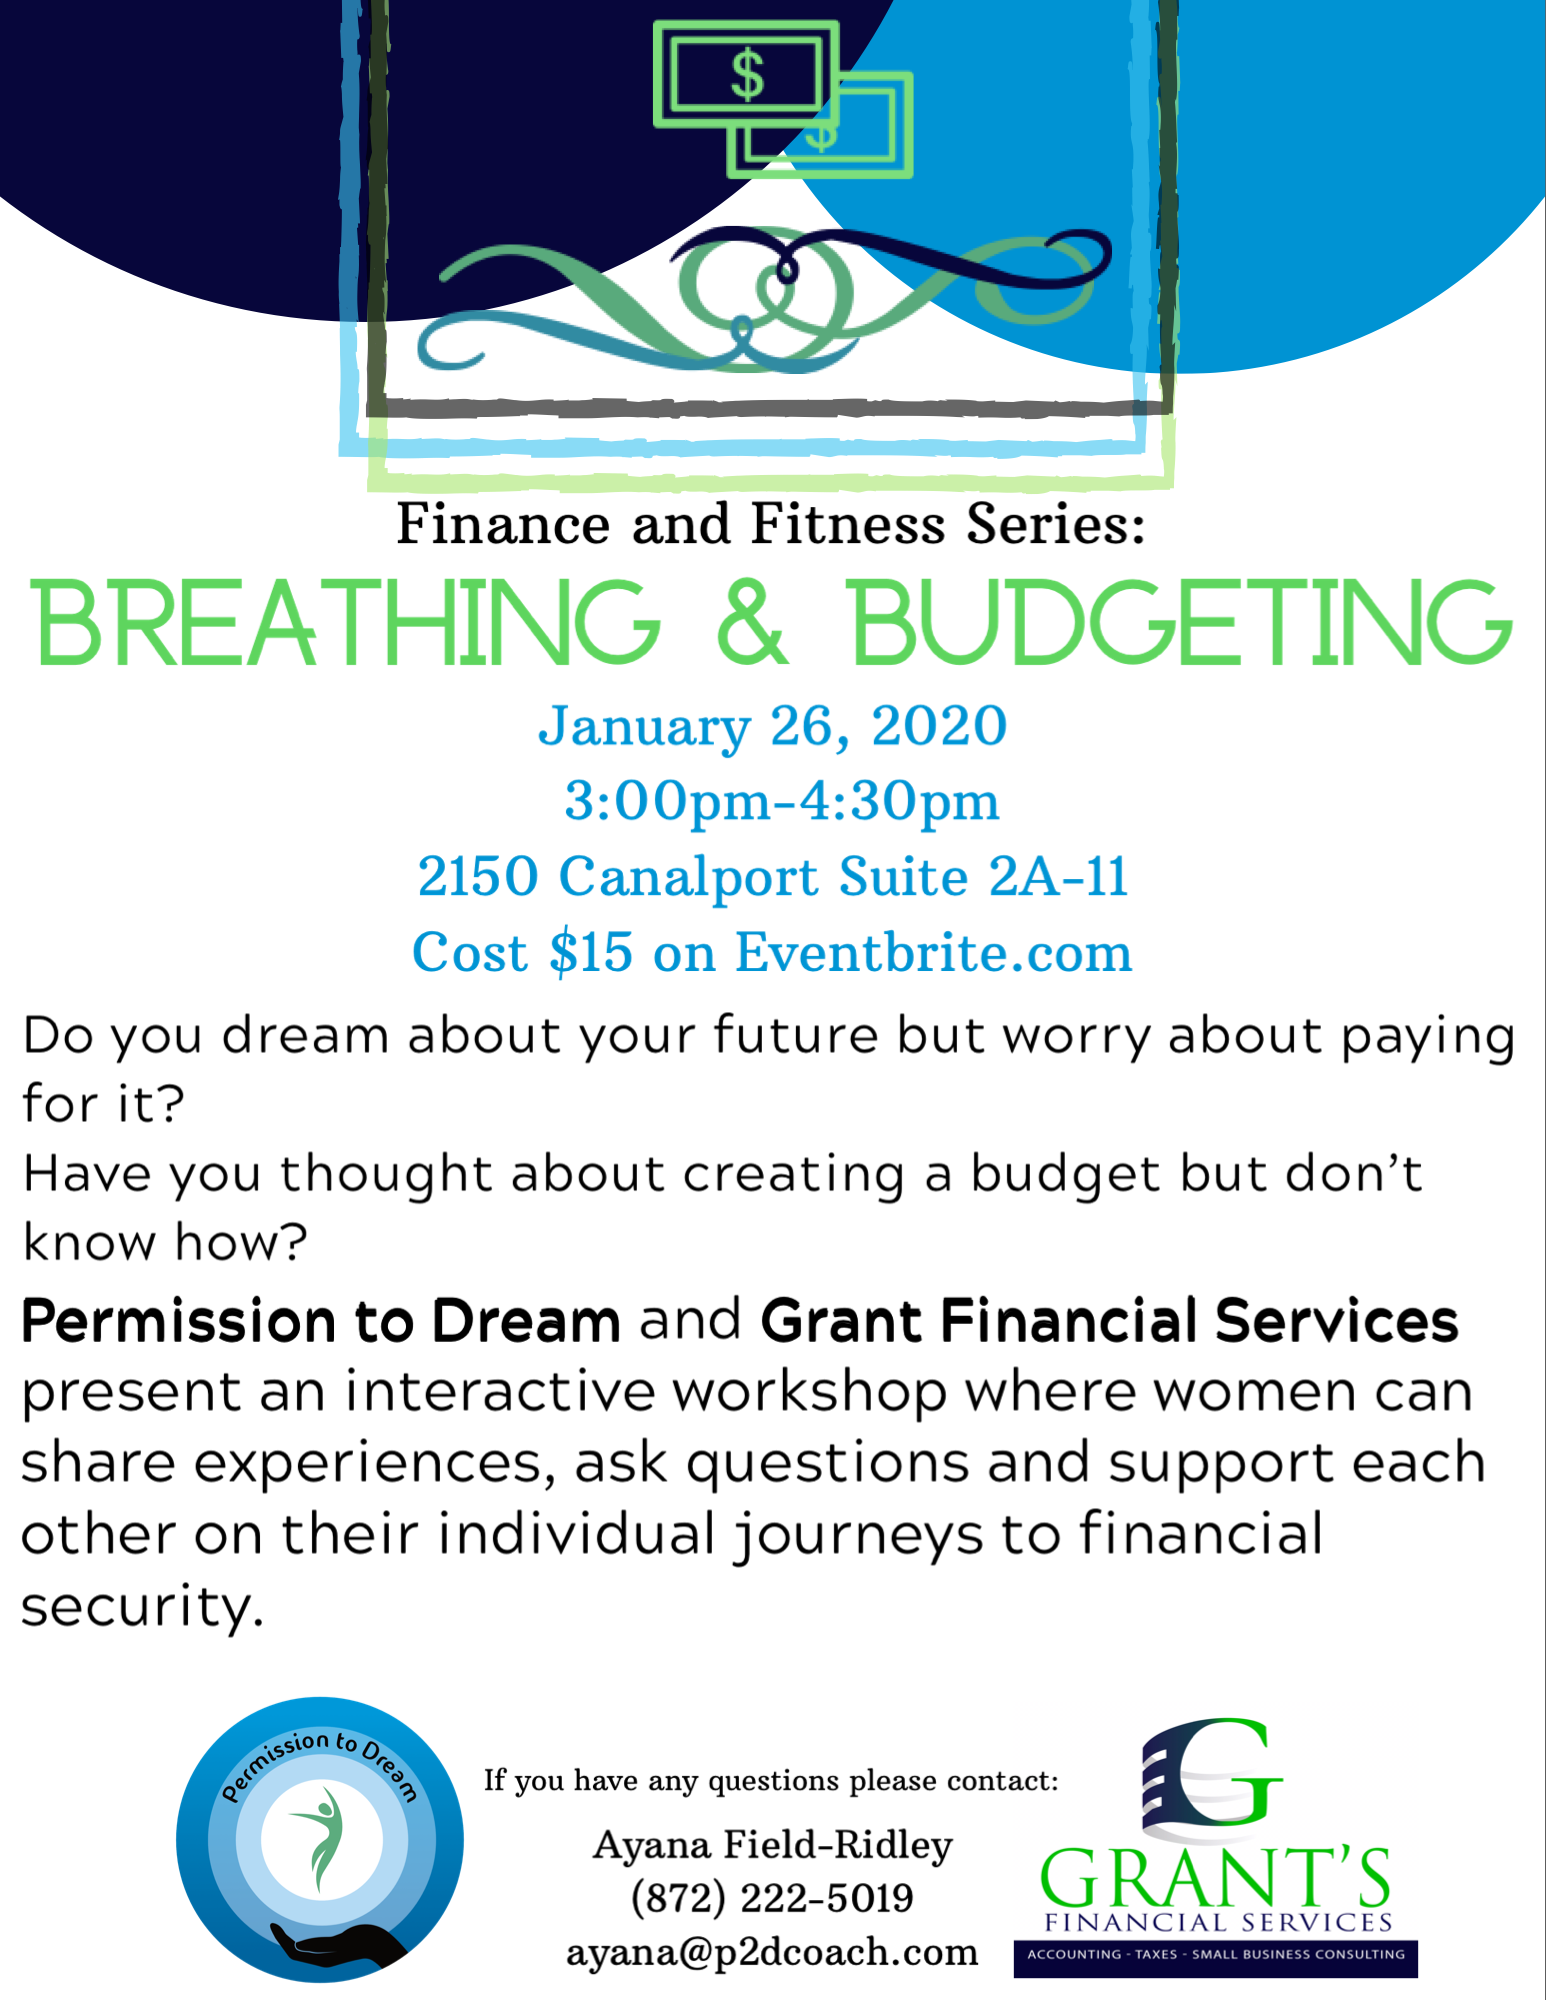 Finance and Fitness Series